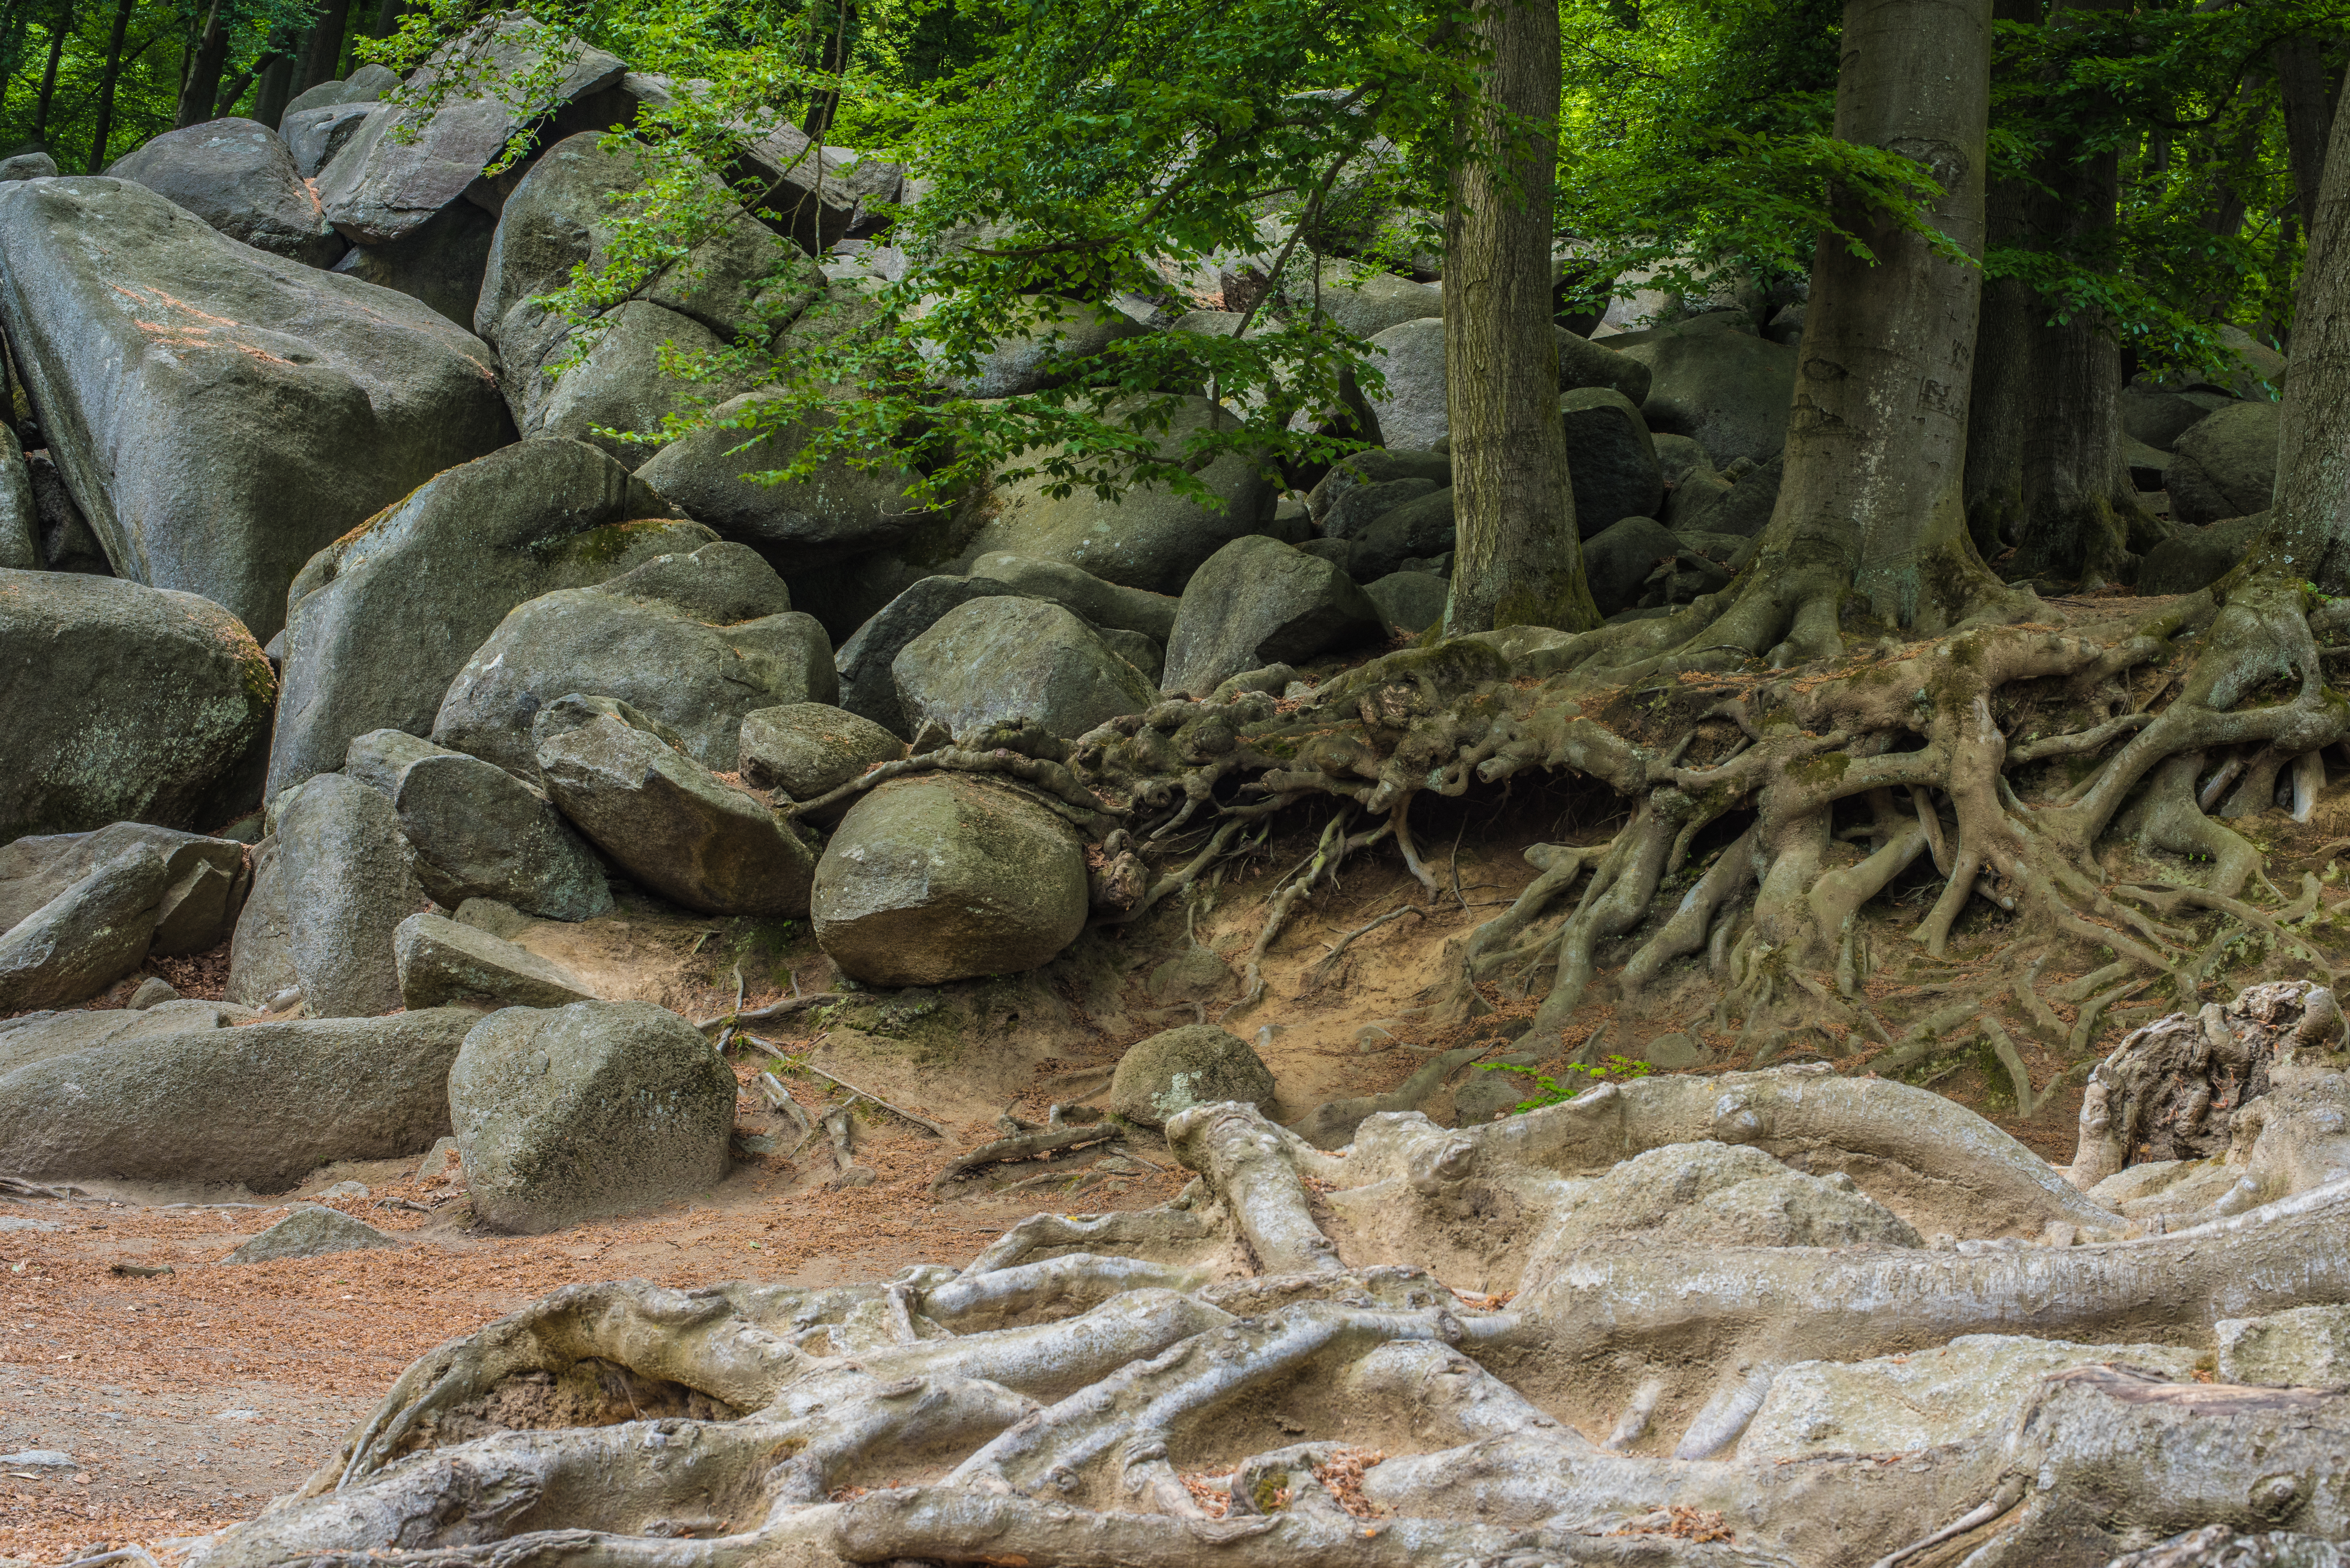 File:Rocks and tree roots.jpg - Wikimedia Commons